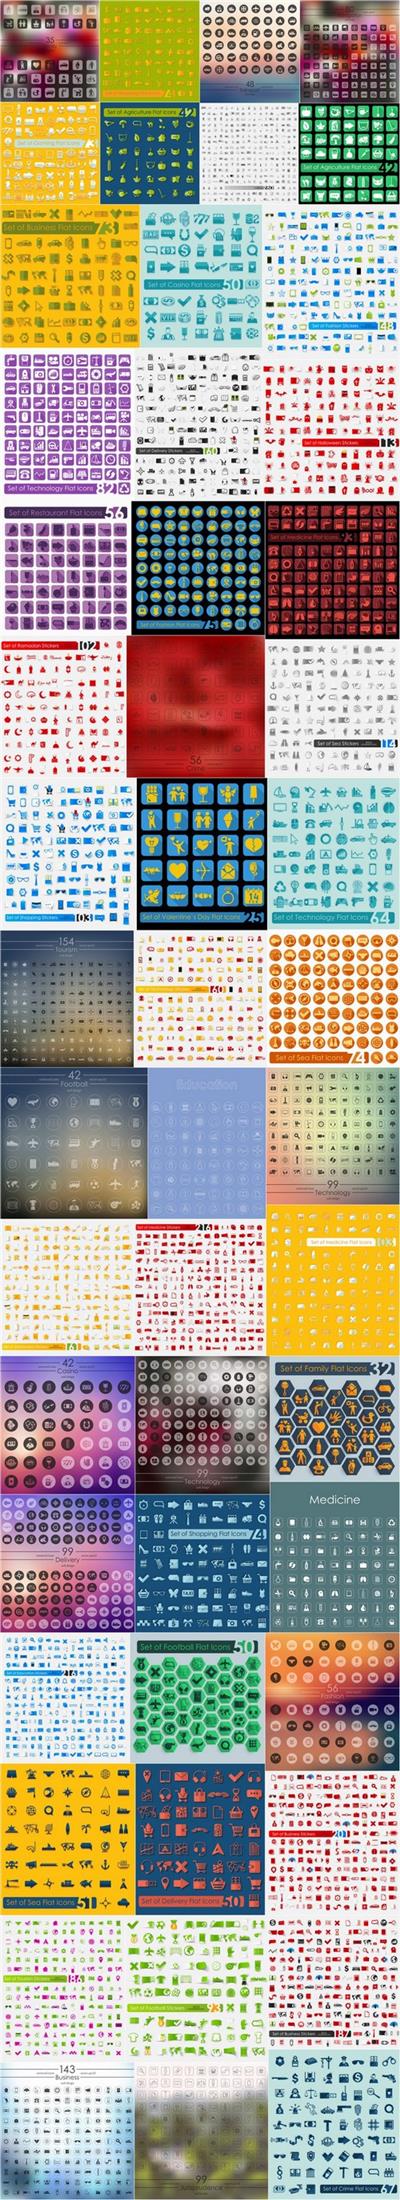 MEGA collection icons & stickers - 50 Set of EPS Vector